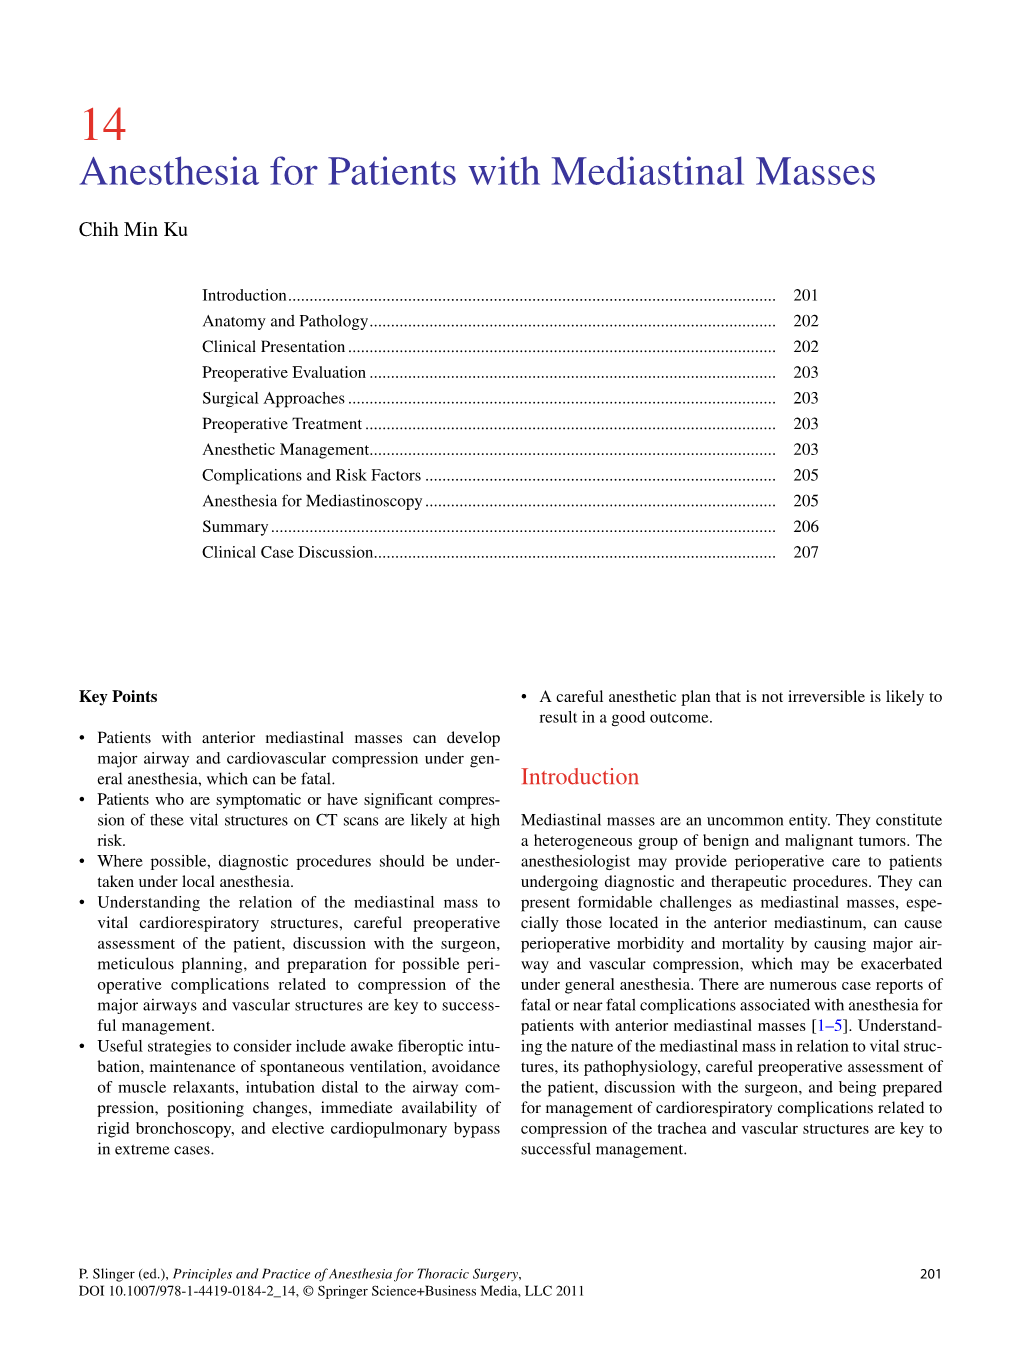 Anesthesia for Patients with Mediastinal Masses